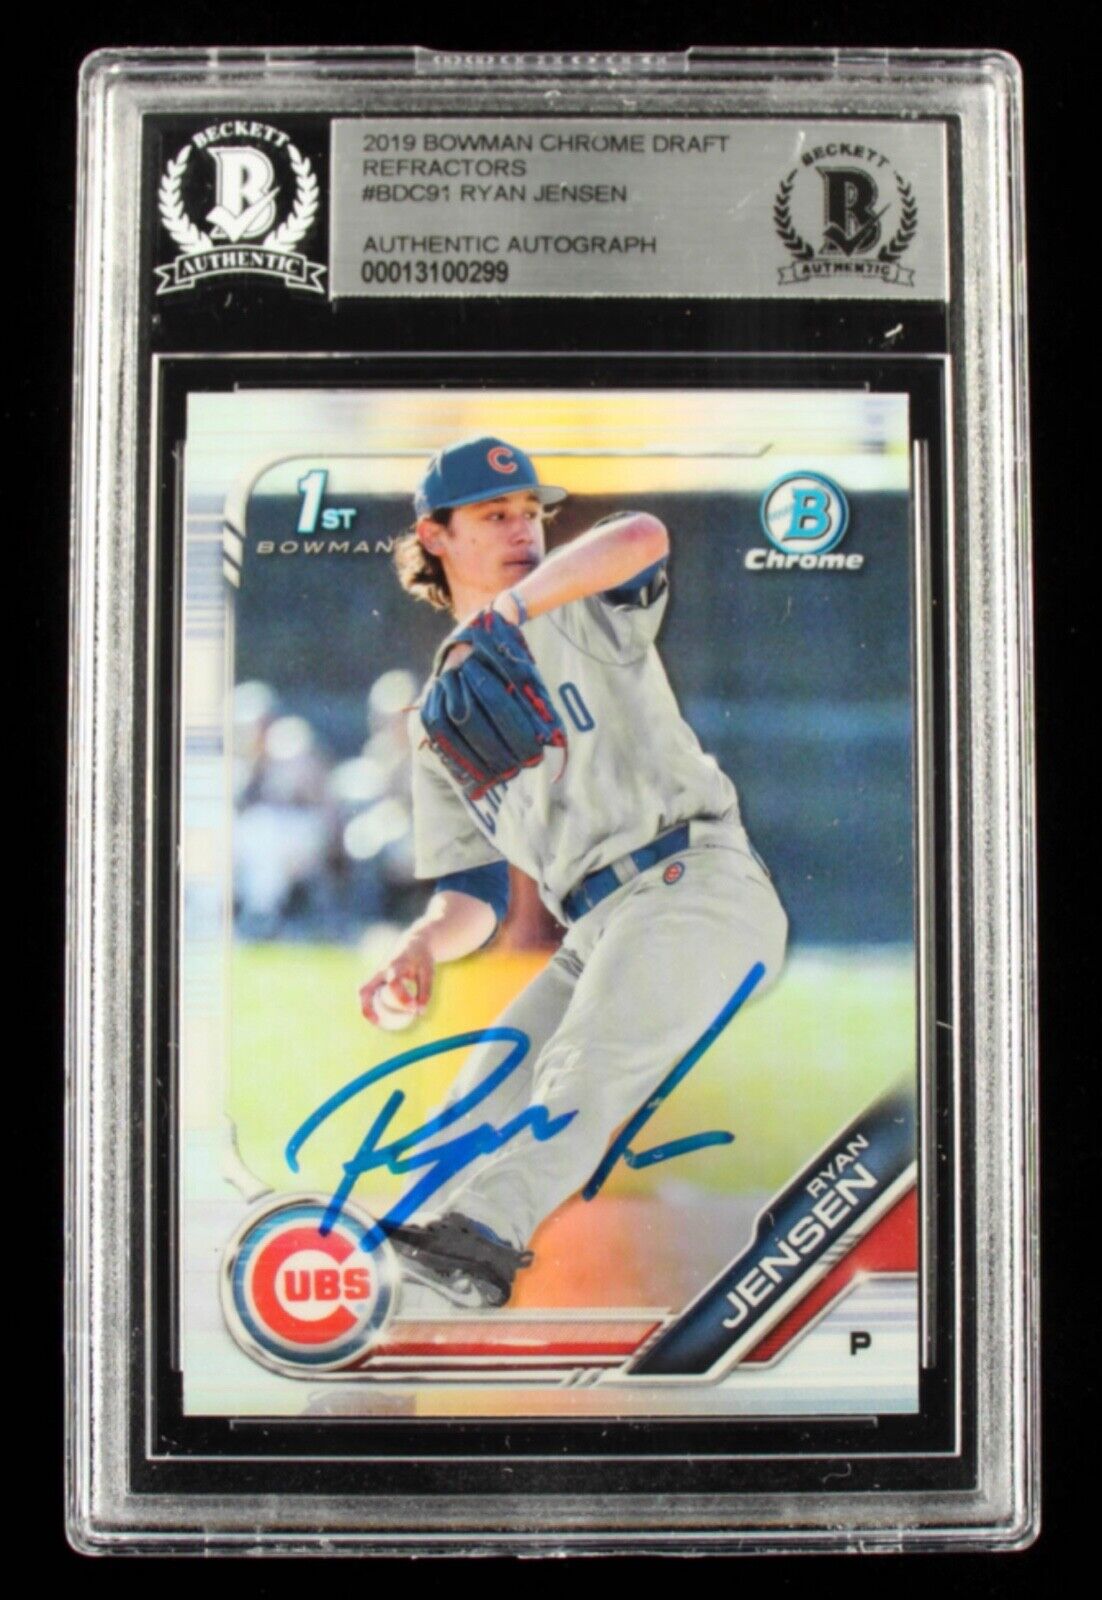 Ryan Jensen ROOKIE CARD Signed 2019 Bowman 1st ed Chrome Draft Refractors #BDC91. rookie card picture